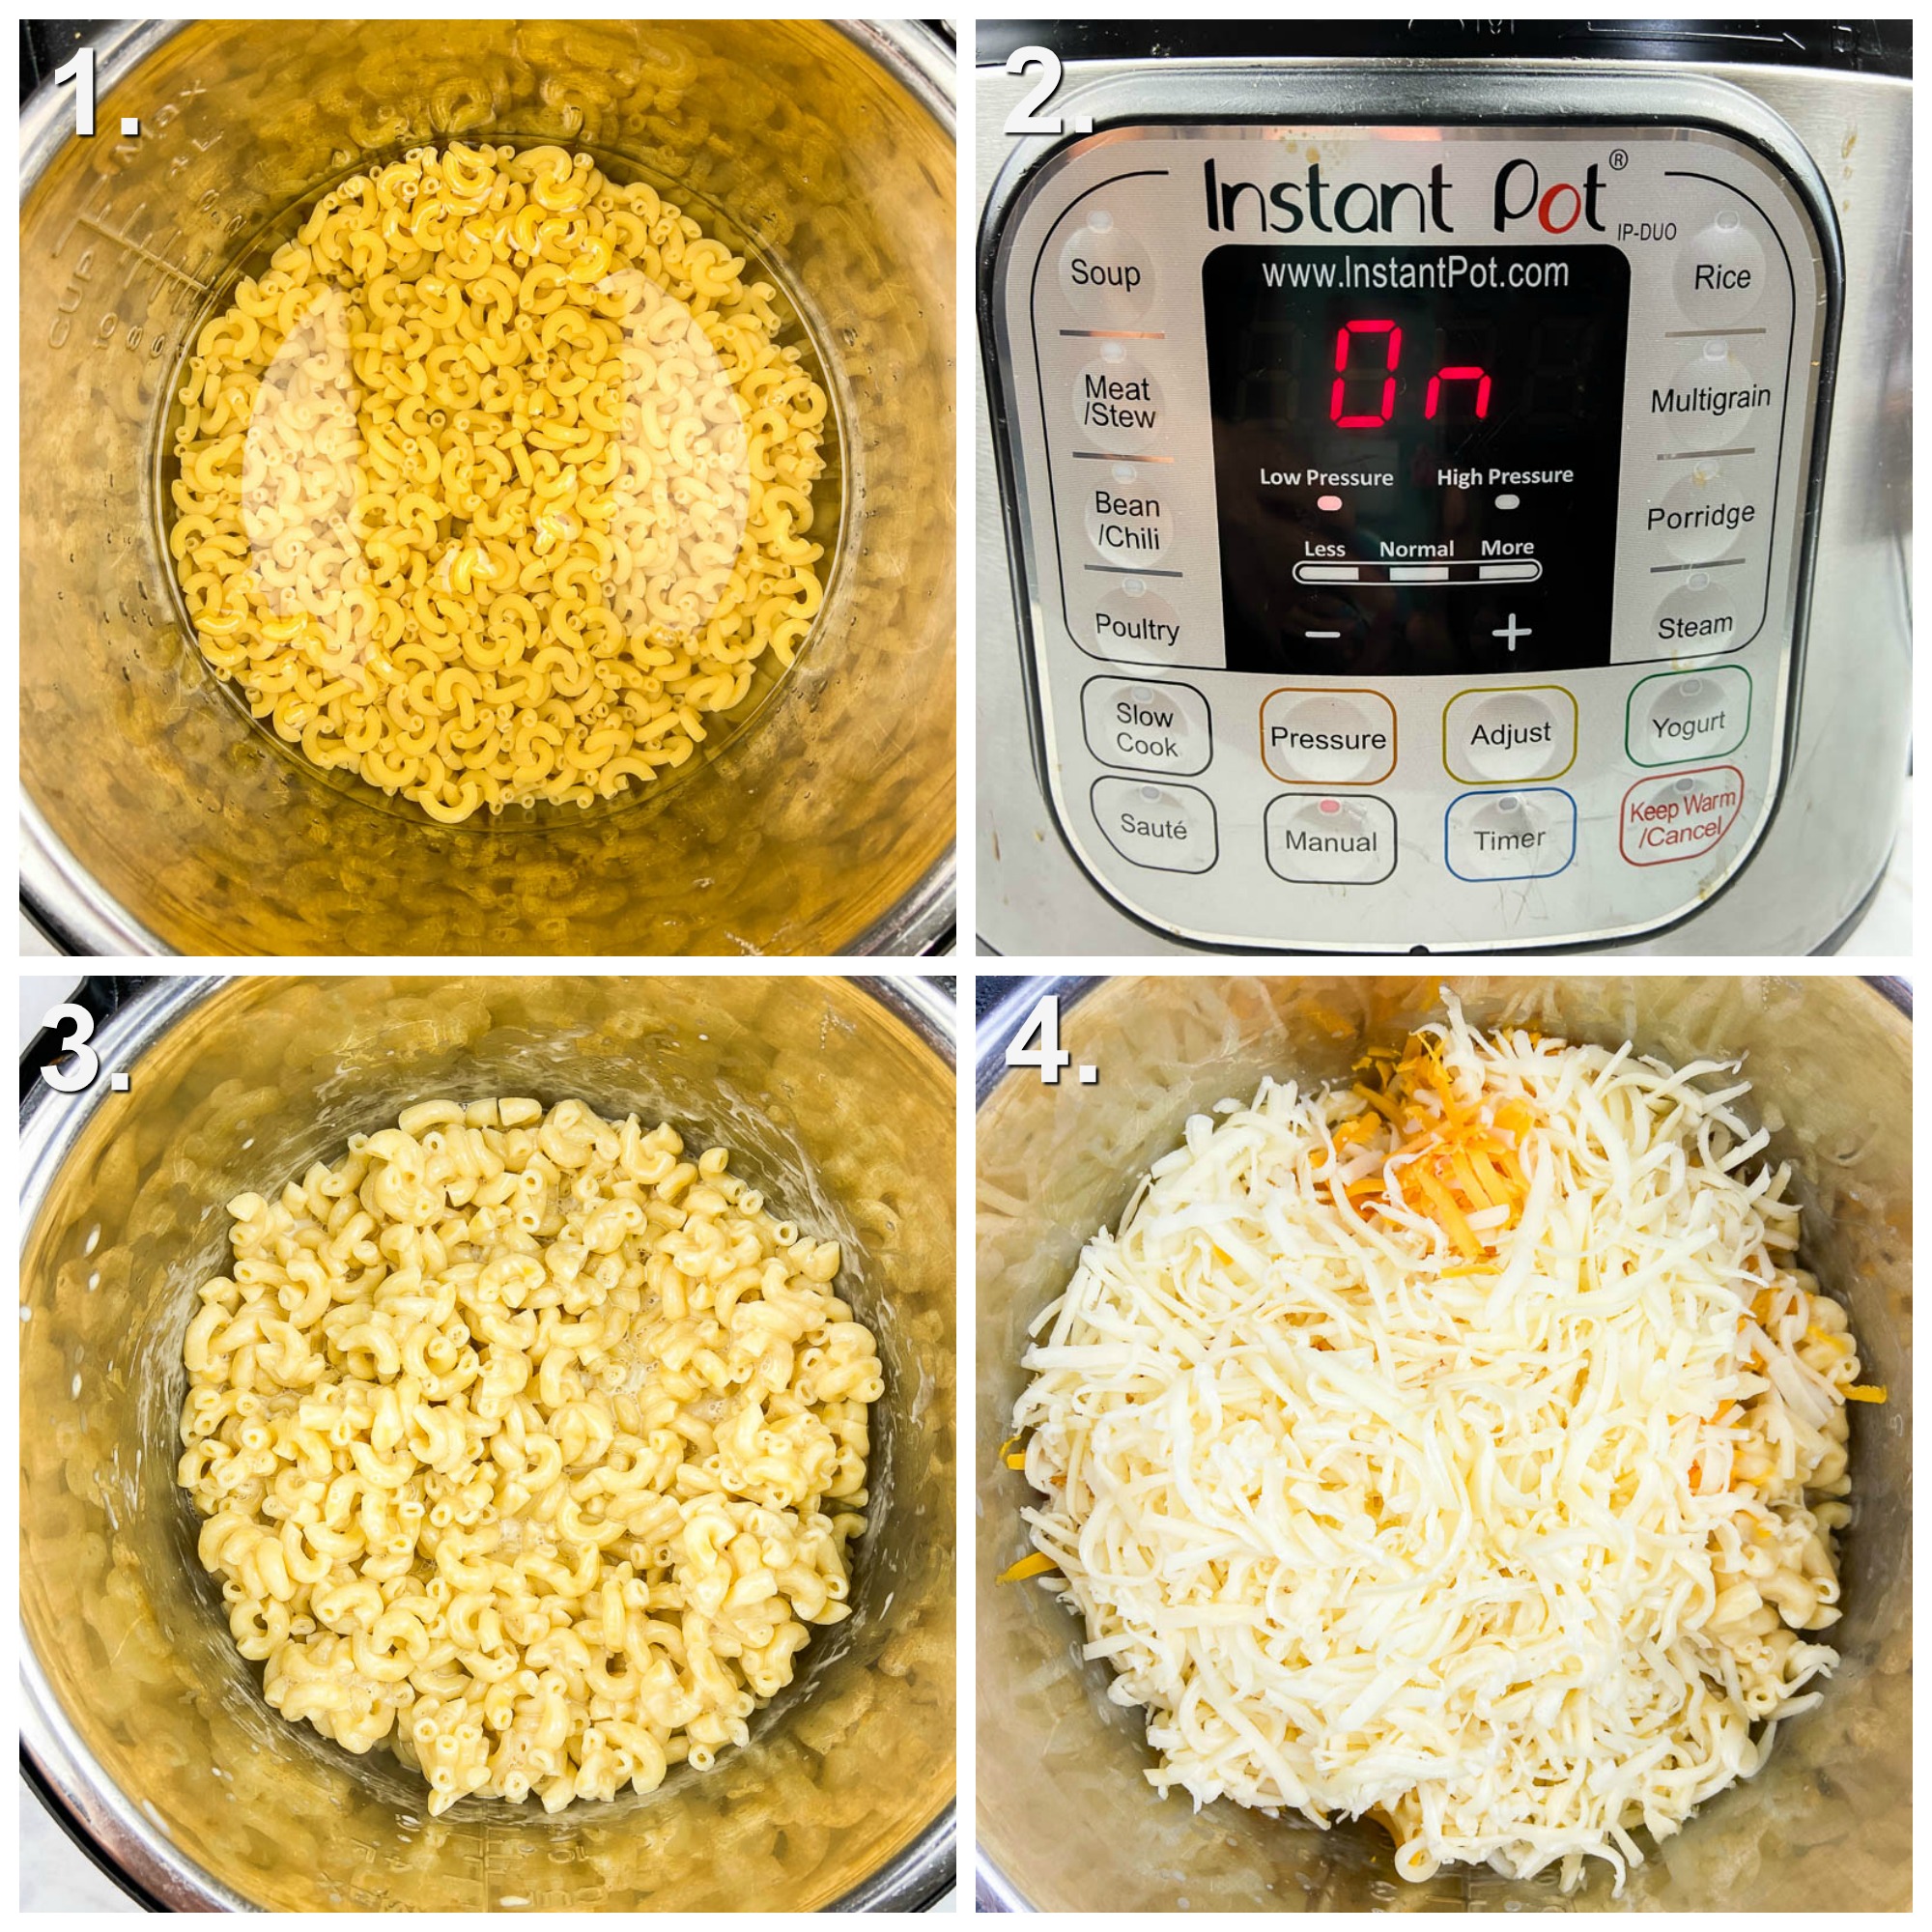 https://www.lifesambrosia.com/wp-content/uploads/xStep-by-Step-Photos-Instant-Pot-Mac-and-Cheese-.jpg.pagespeed.ic.3jRlFp99N4.jpg